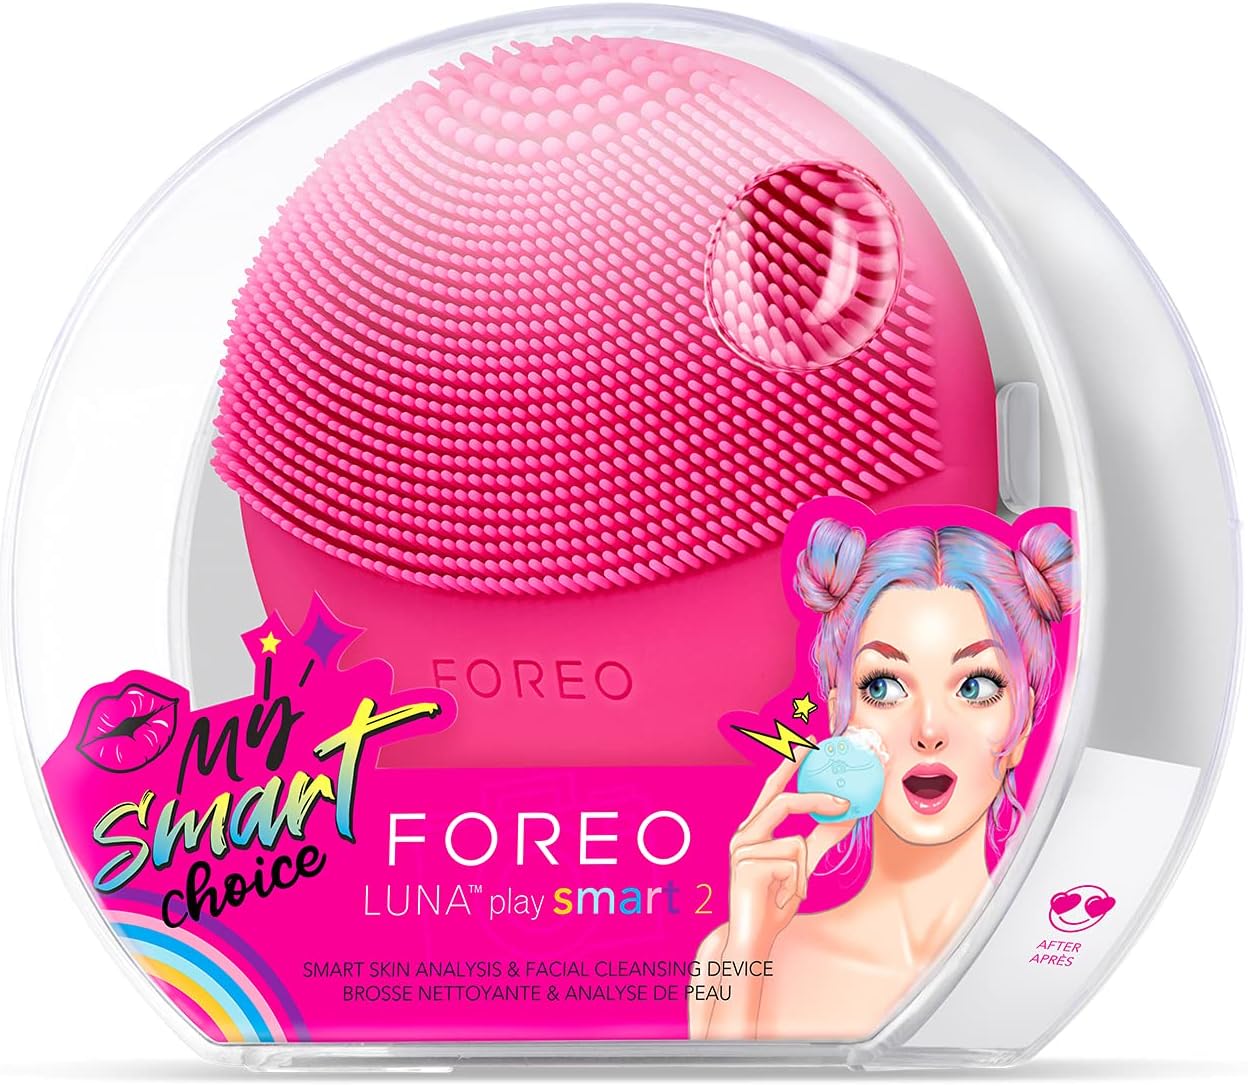 FOREO LUNA play smart 2 - Facial Cleansing Brush - 2-in-1 Skin Analysis & Facial Cleanser - Travel Accessories - Silicone Face Massager - Holiday Essentials - App-connected - Cherry Up